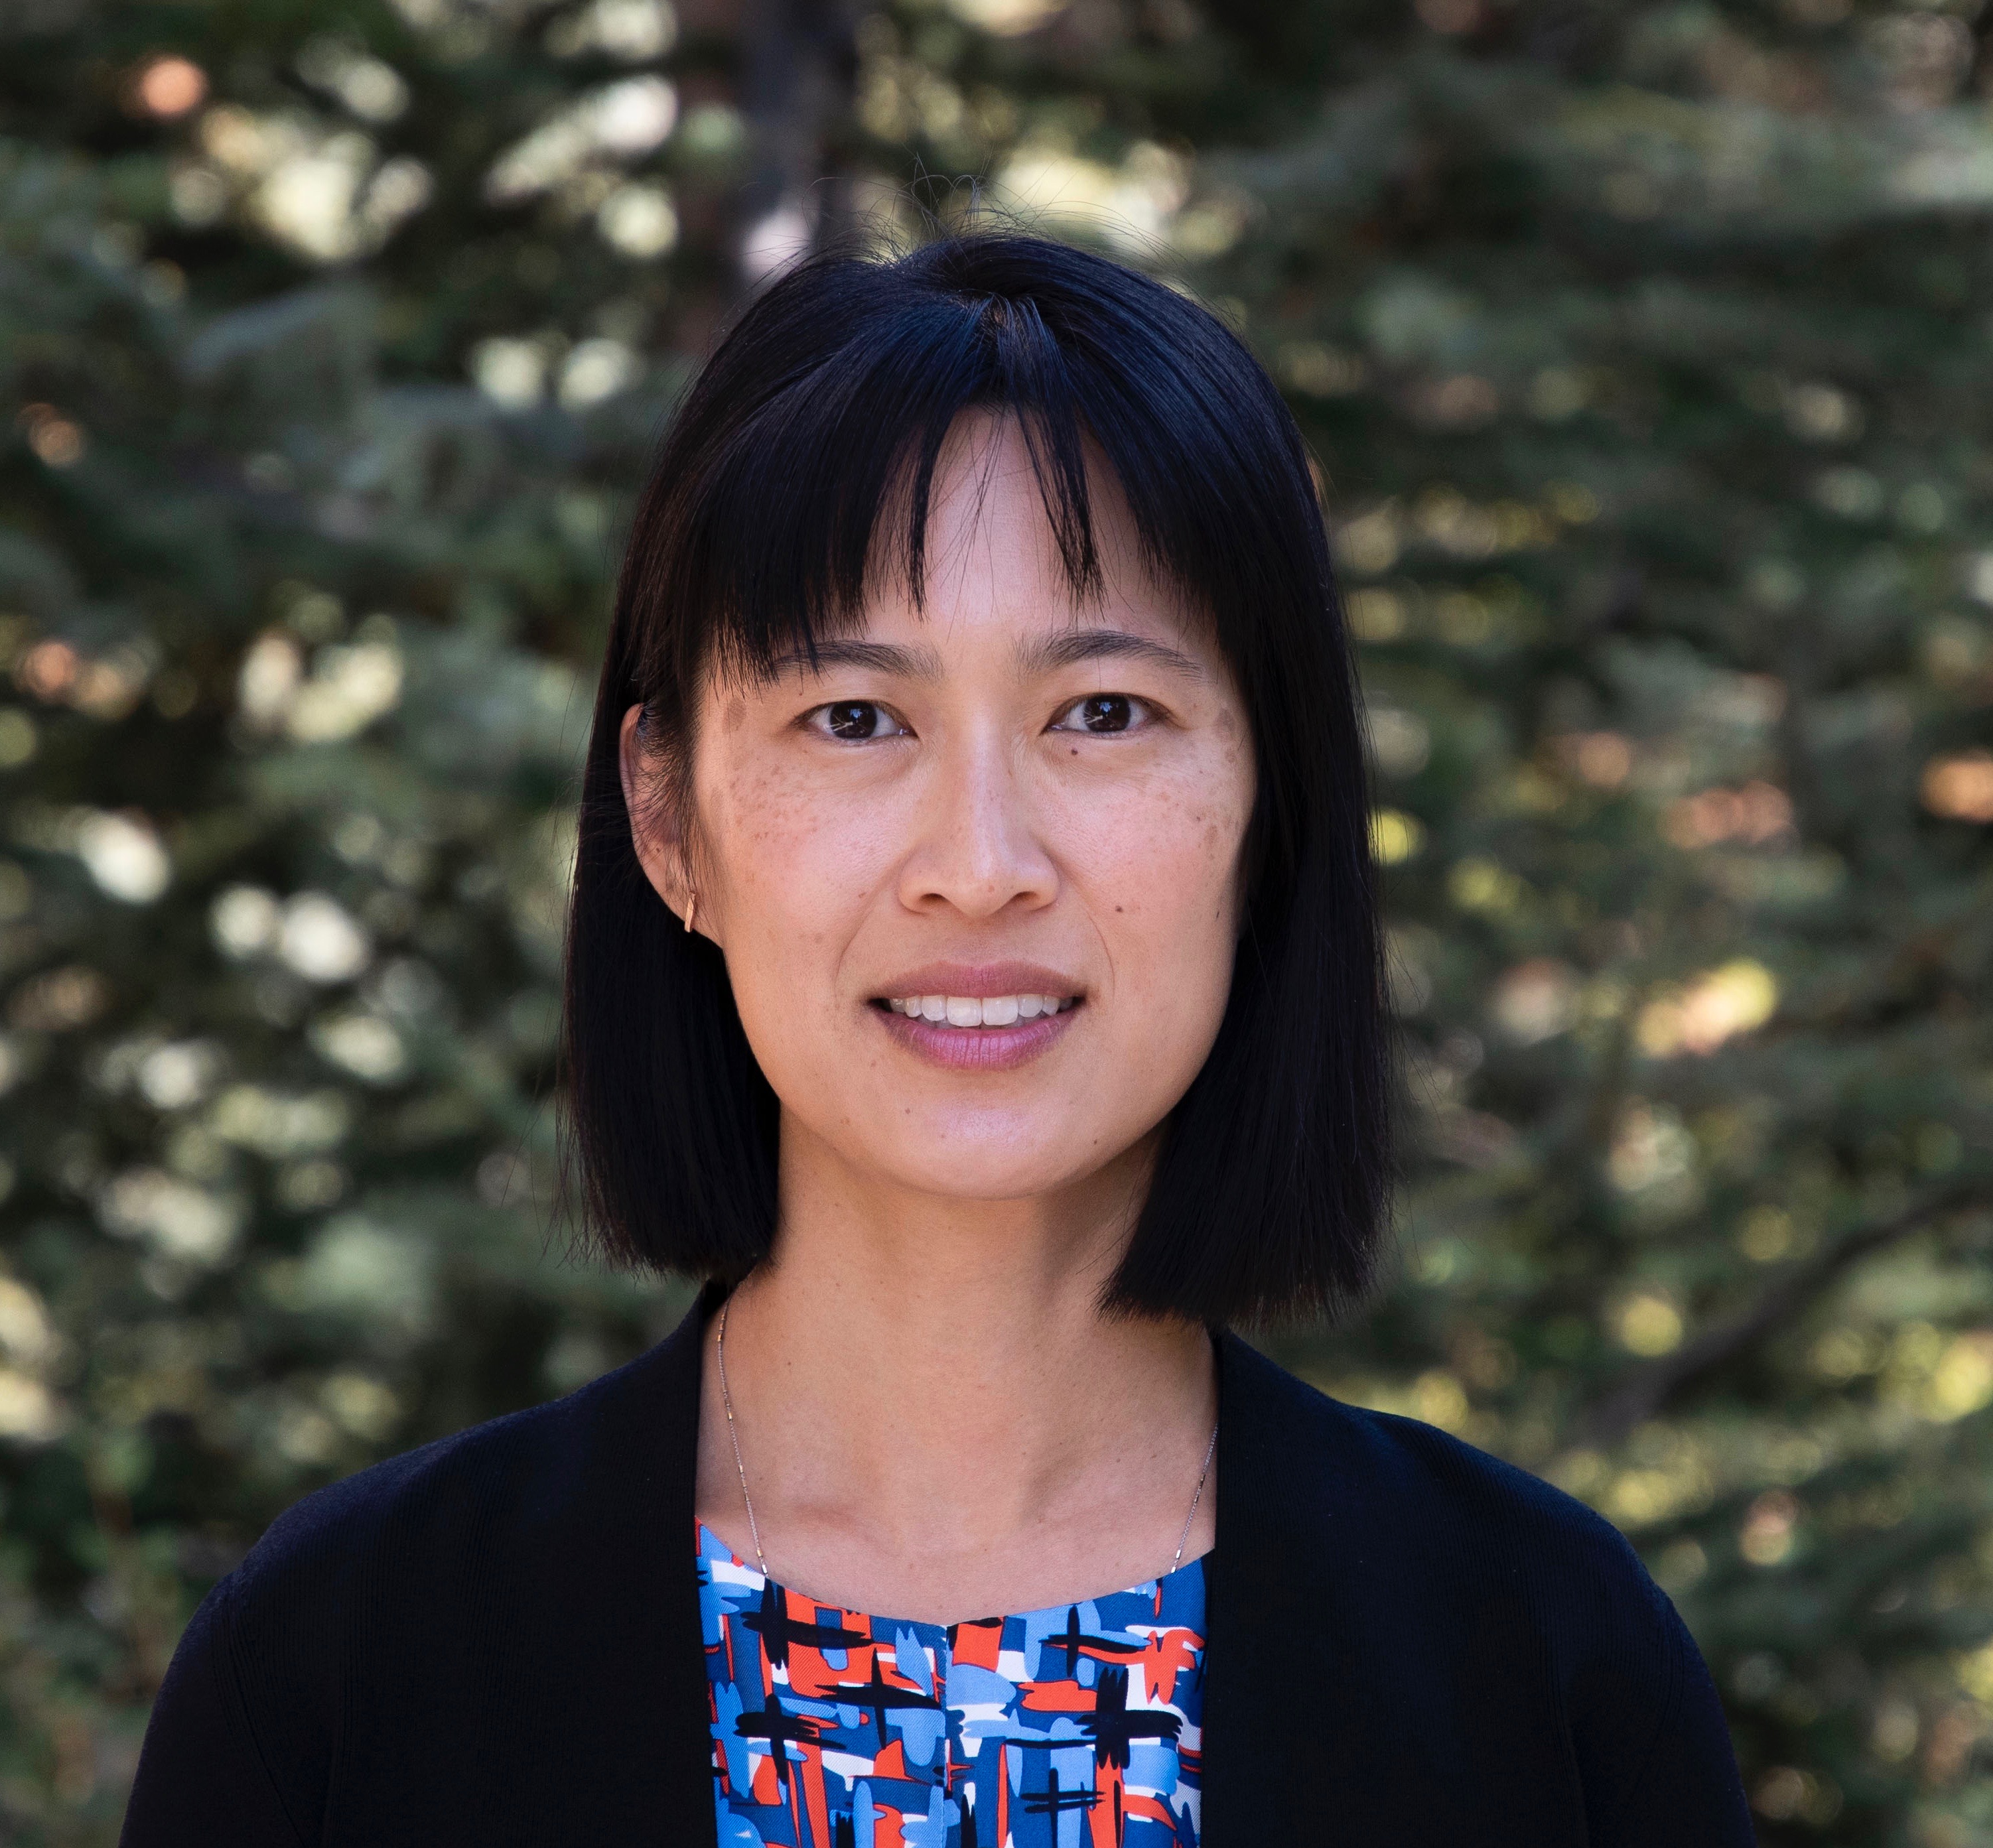 A headshot of professor Tina Cheuk wearing a printed blouse and black cardigan.